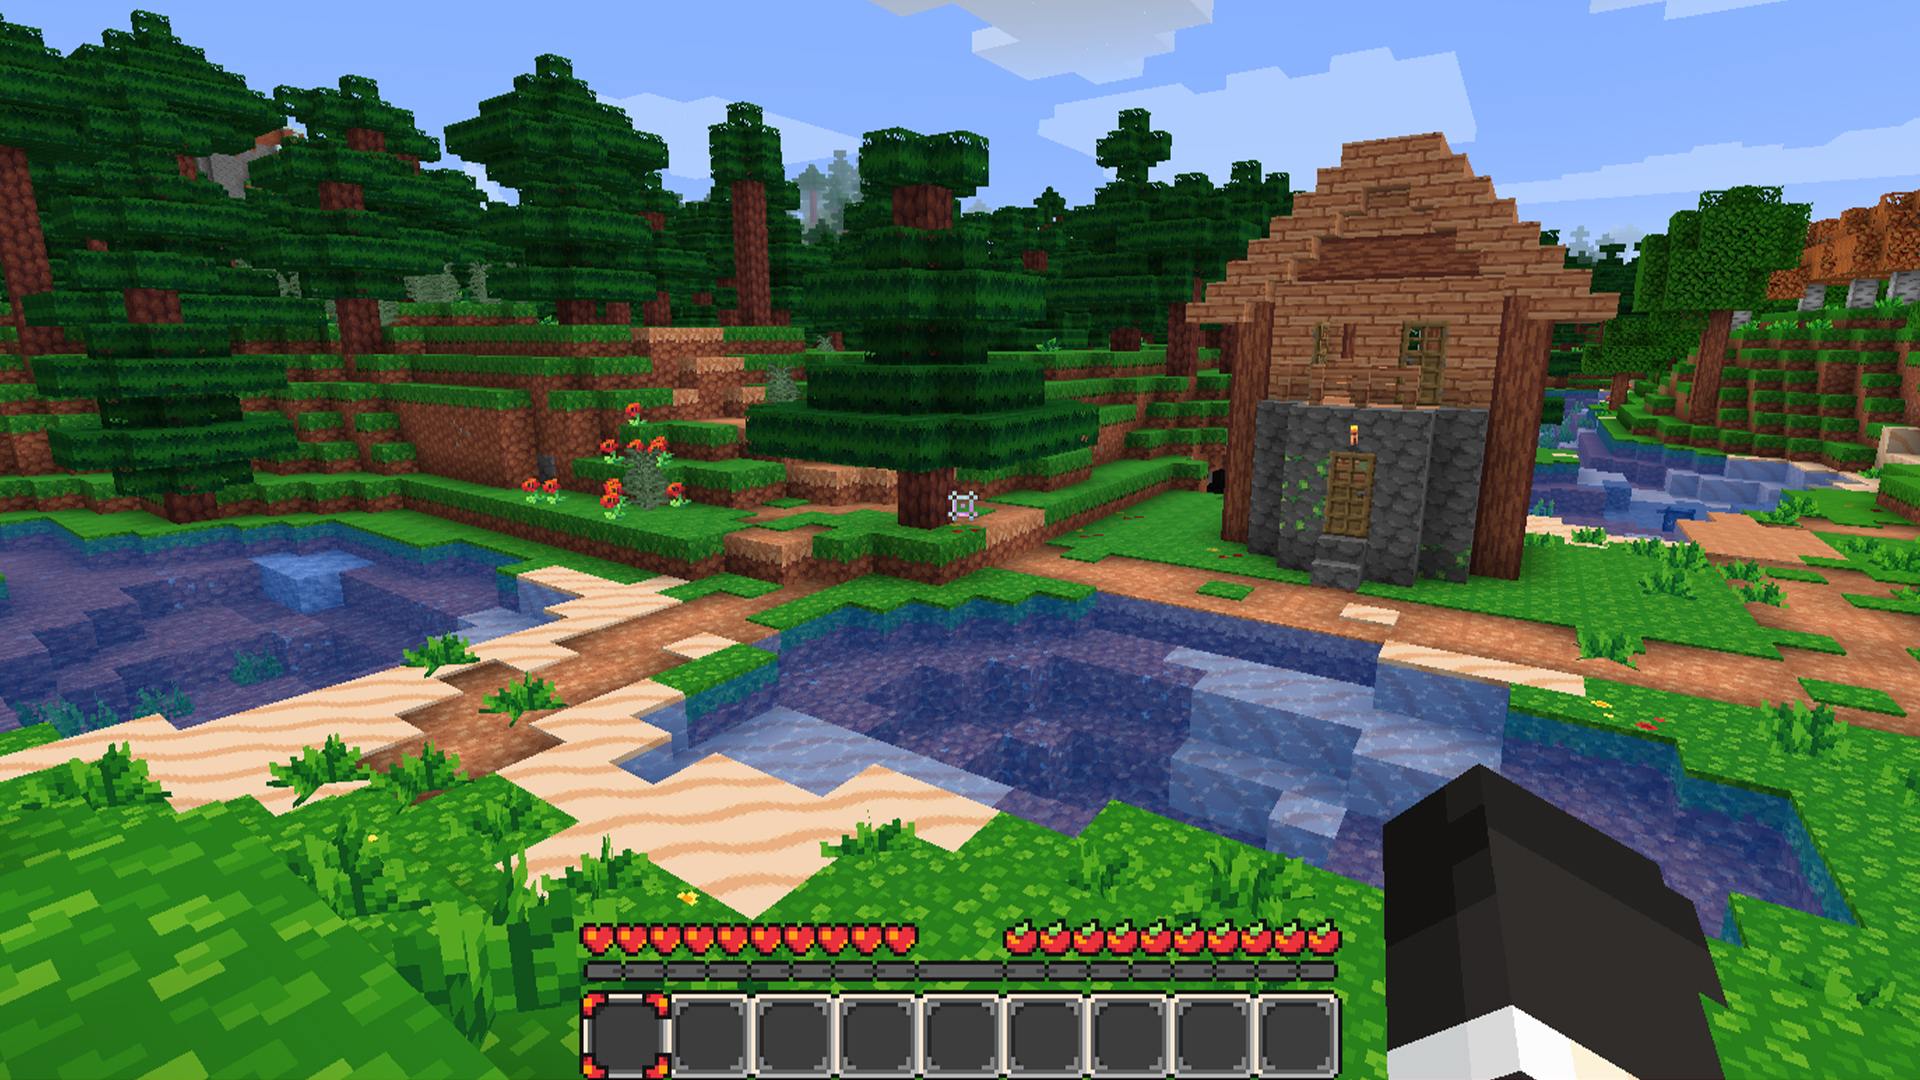 The best Minecraft texture packs to download in 2022 | PCGamesN